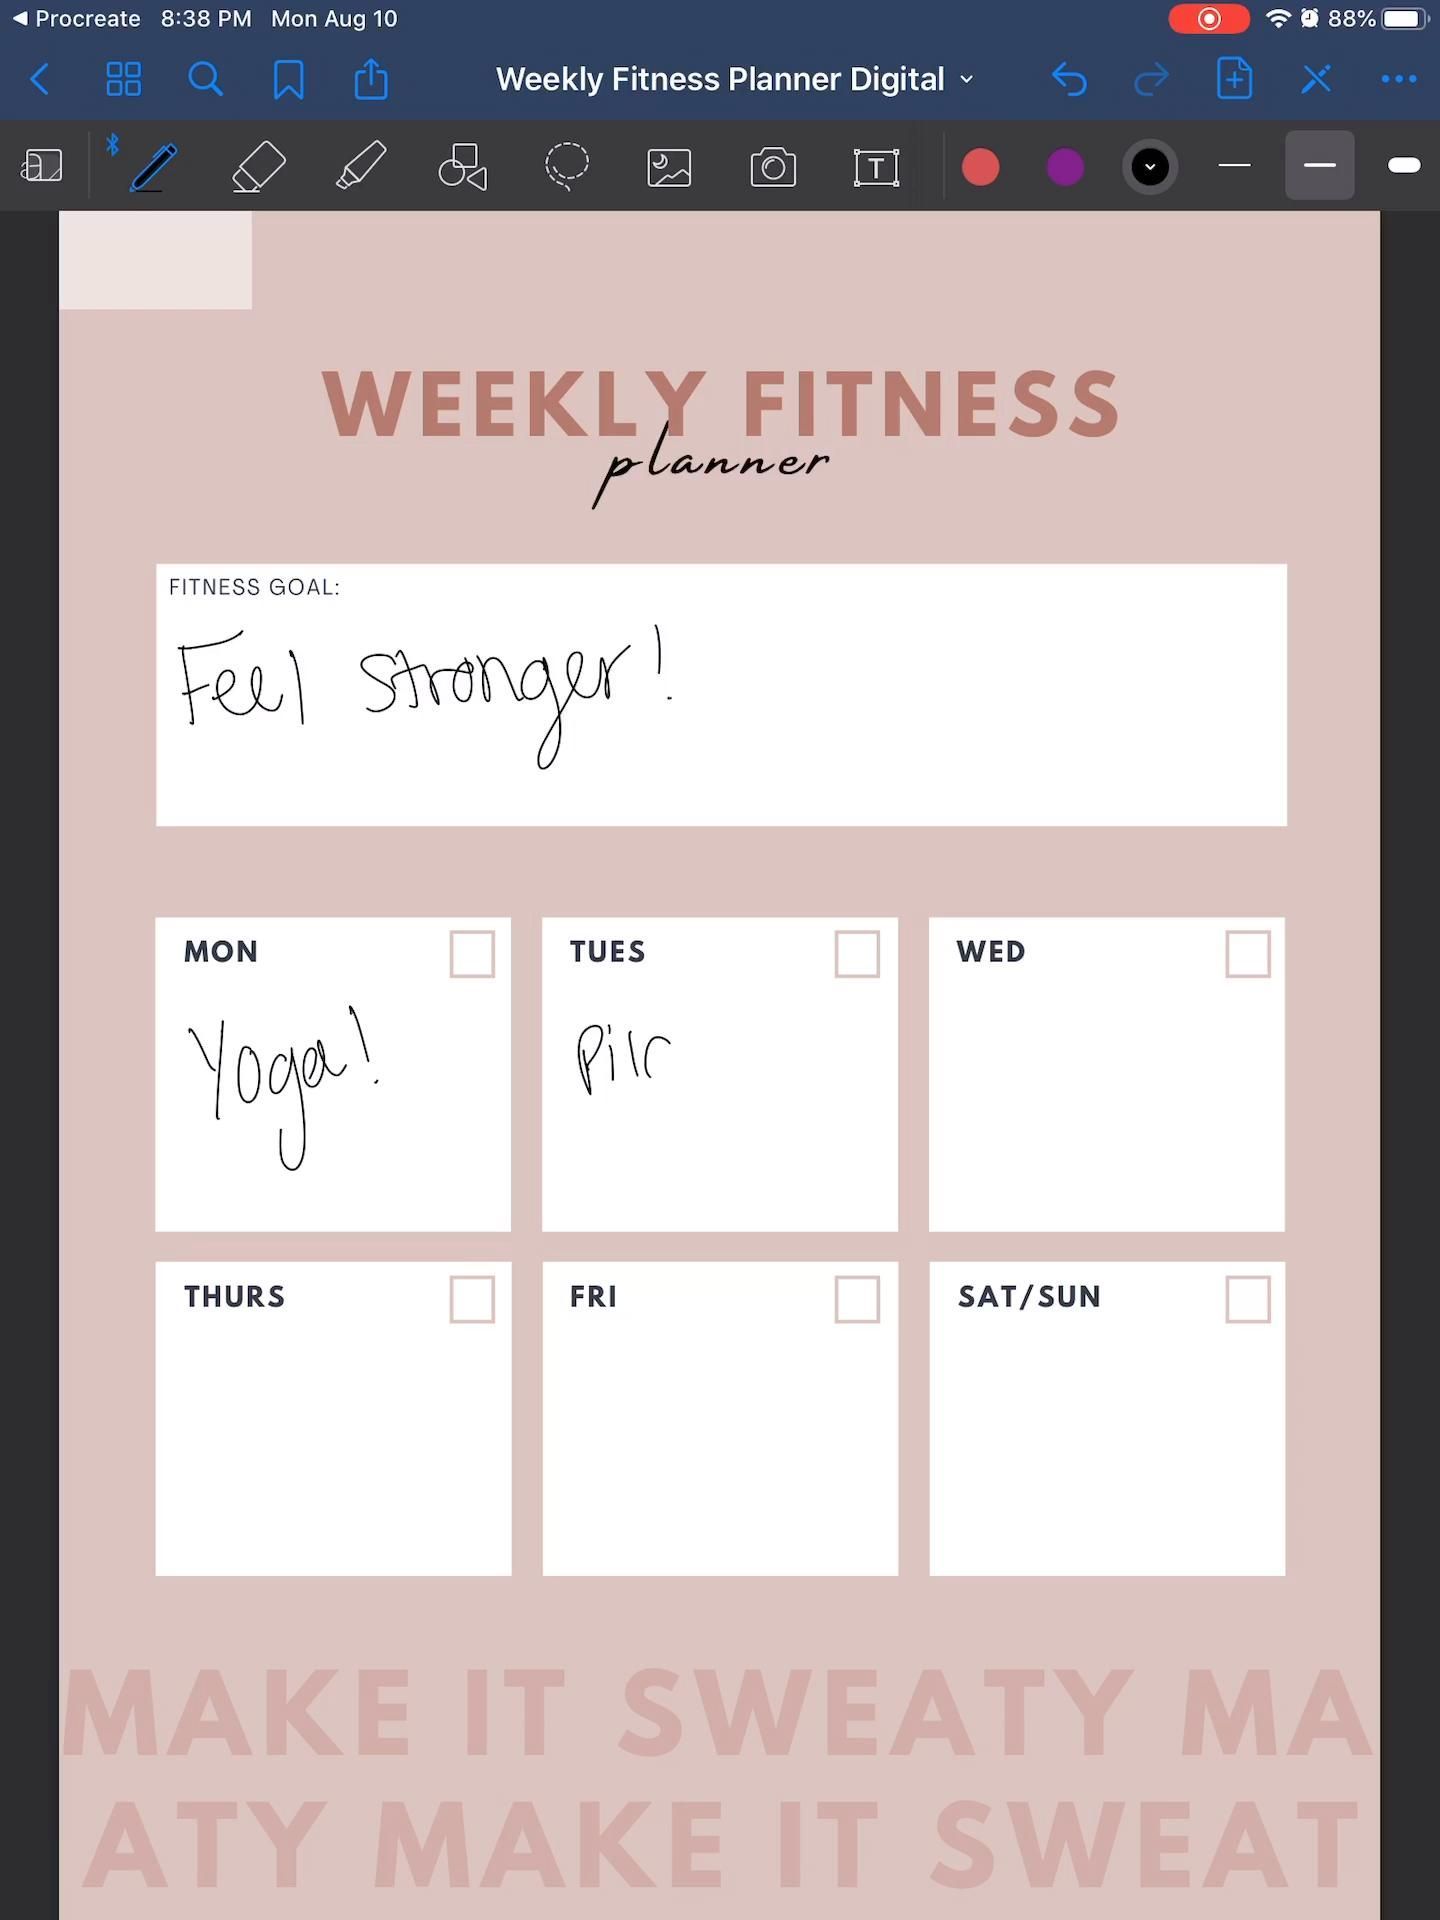 Weekly Fitness Planner  - Great for Goodnotes and iPad Planning - Weekly Fitness Planner  - Great for Goodnotes and iPad Planning -   17 fitness Planner printable ideas